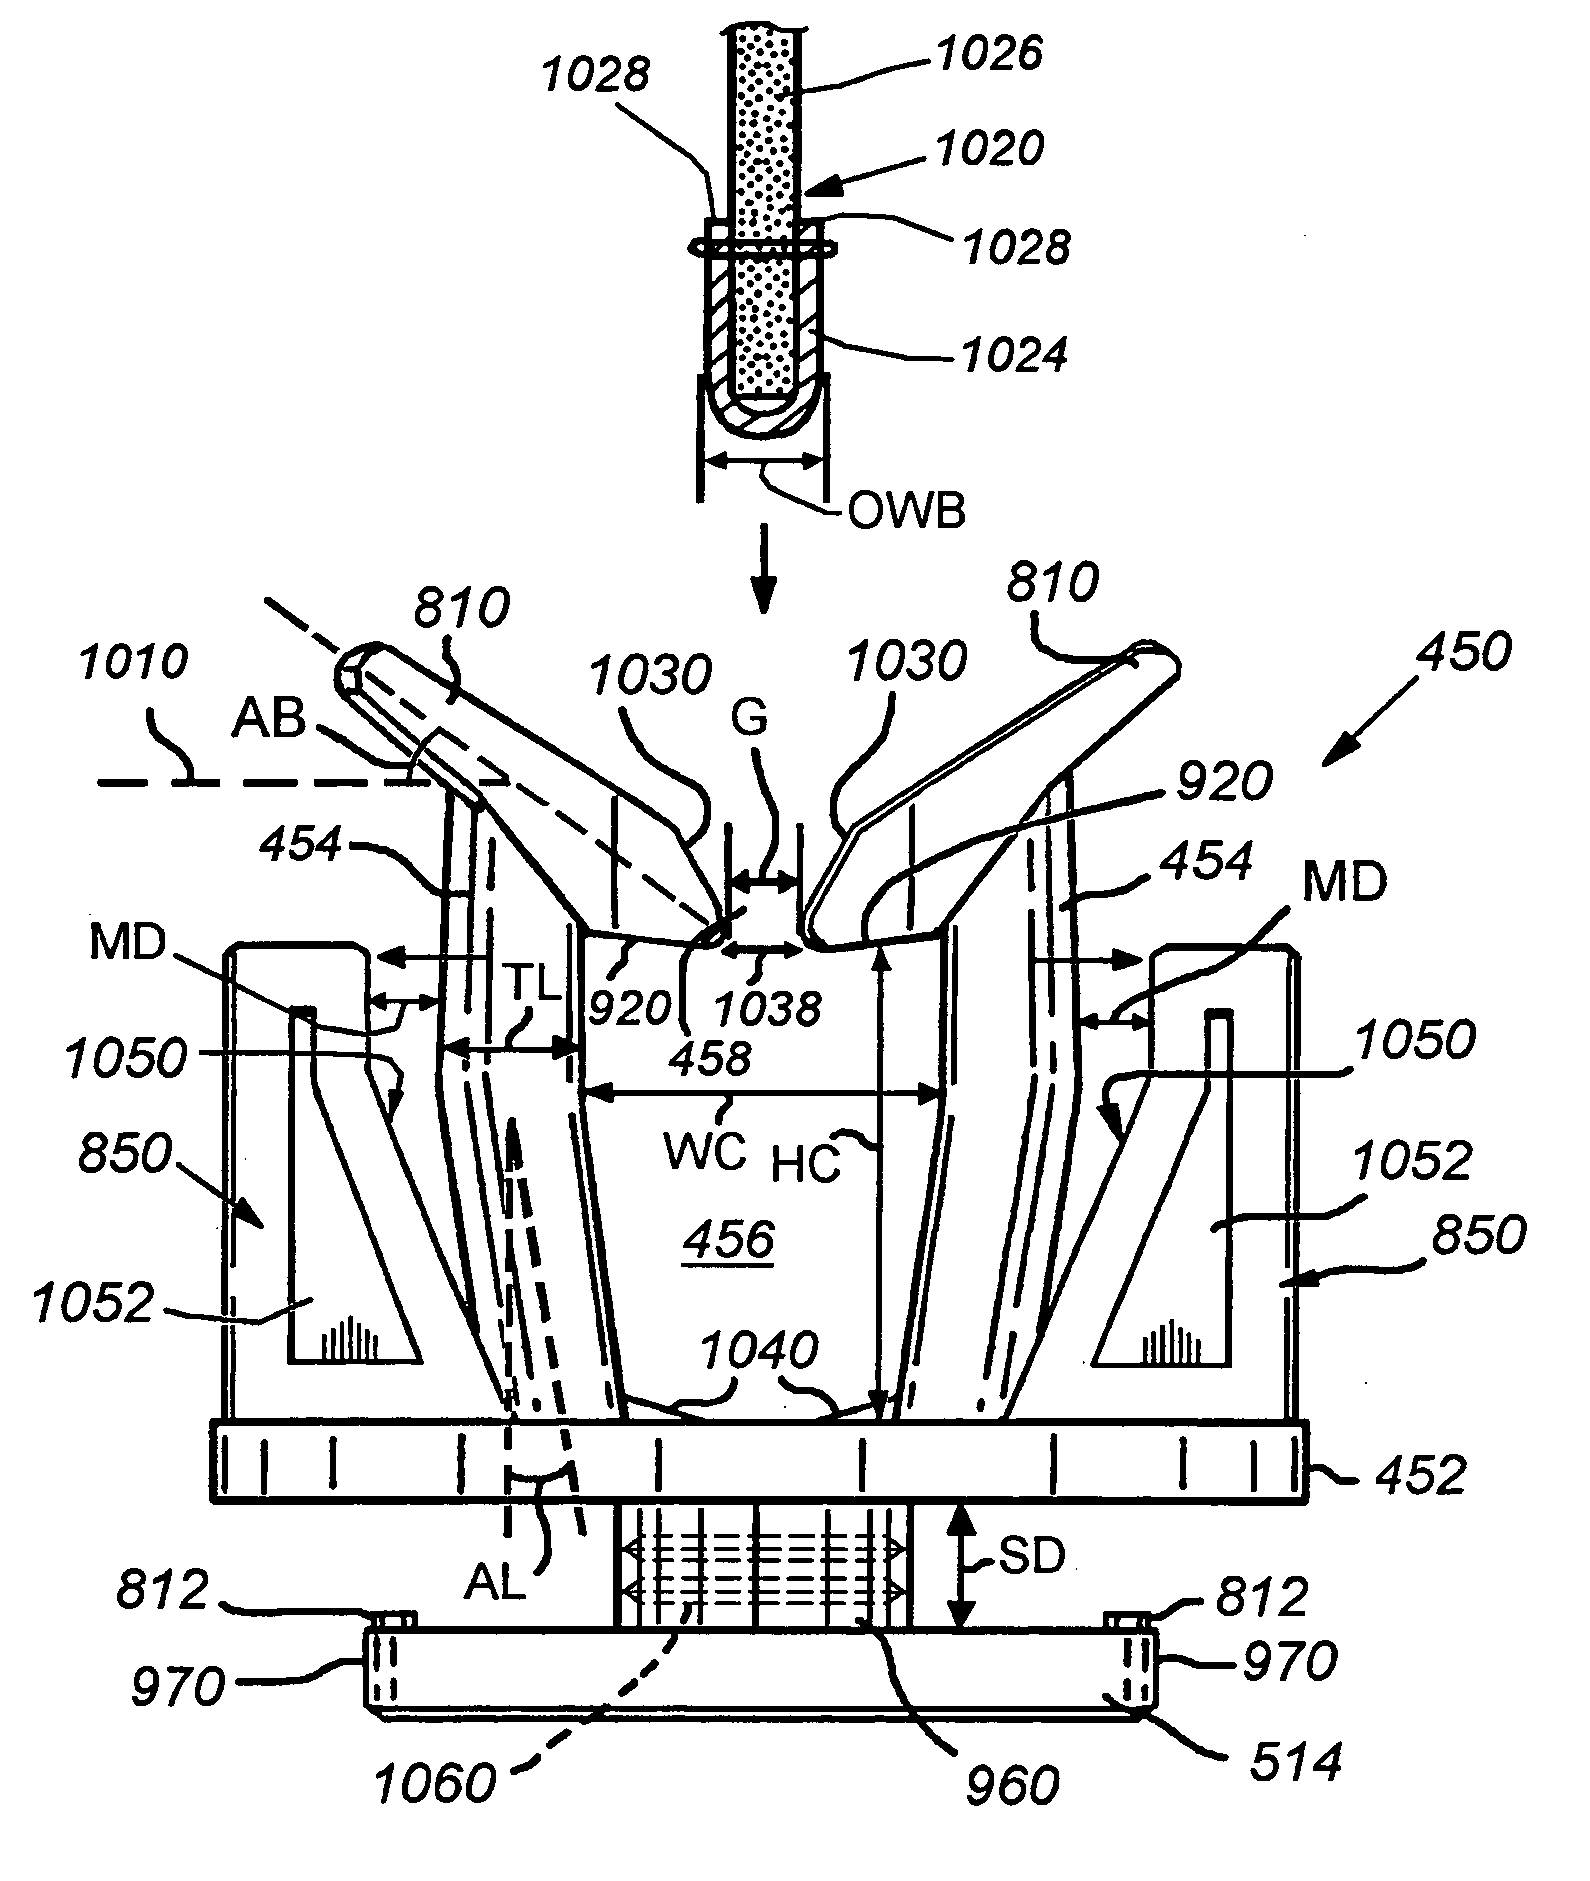 System for attaching trim covers to a flexible substrate